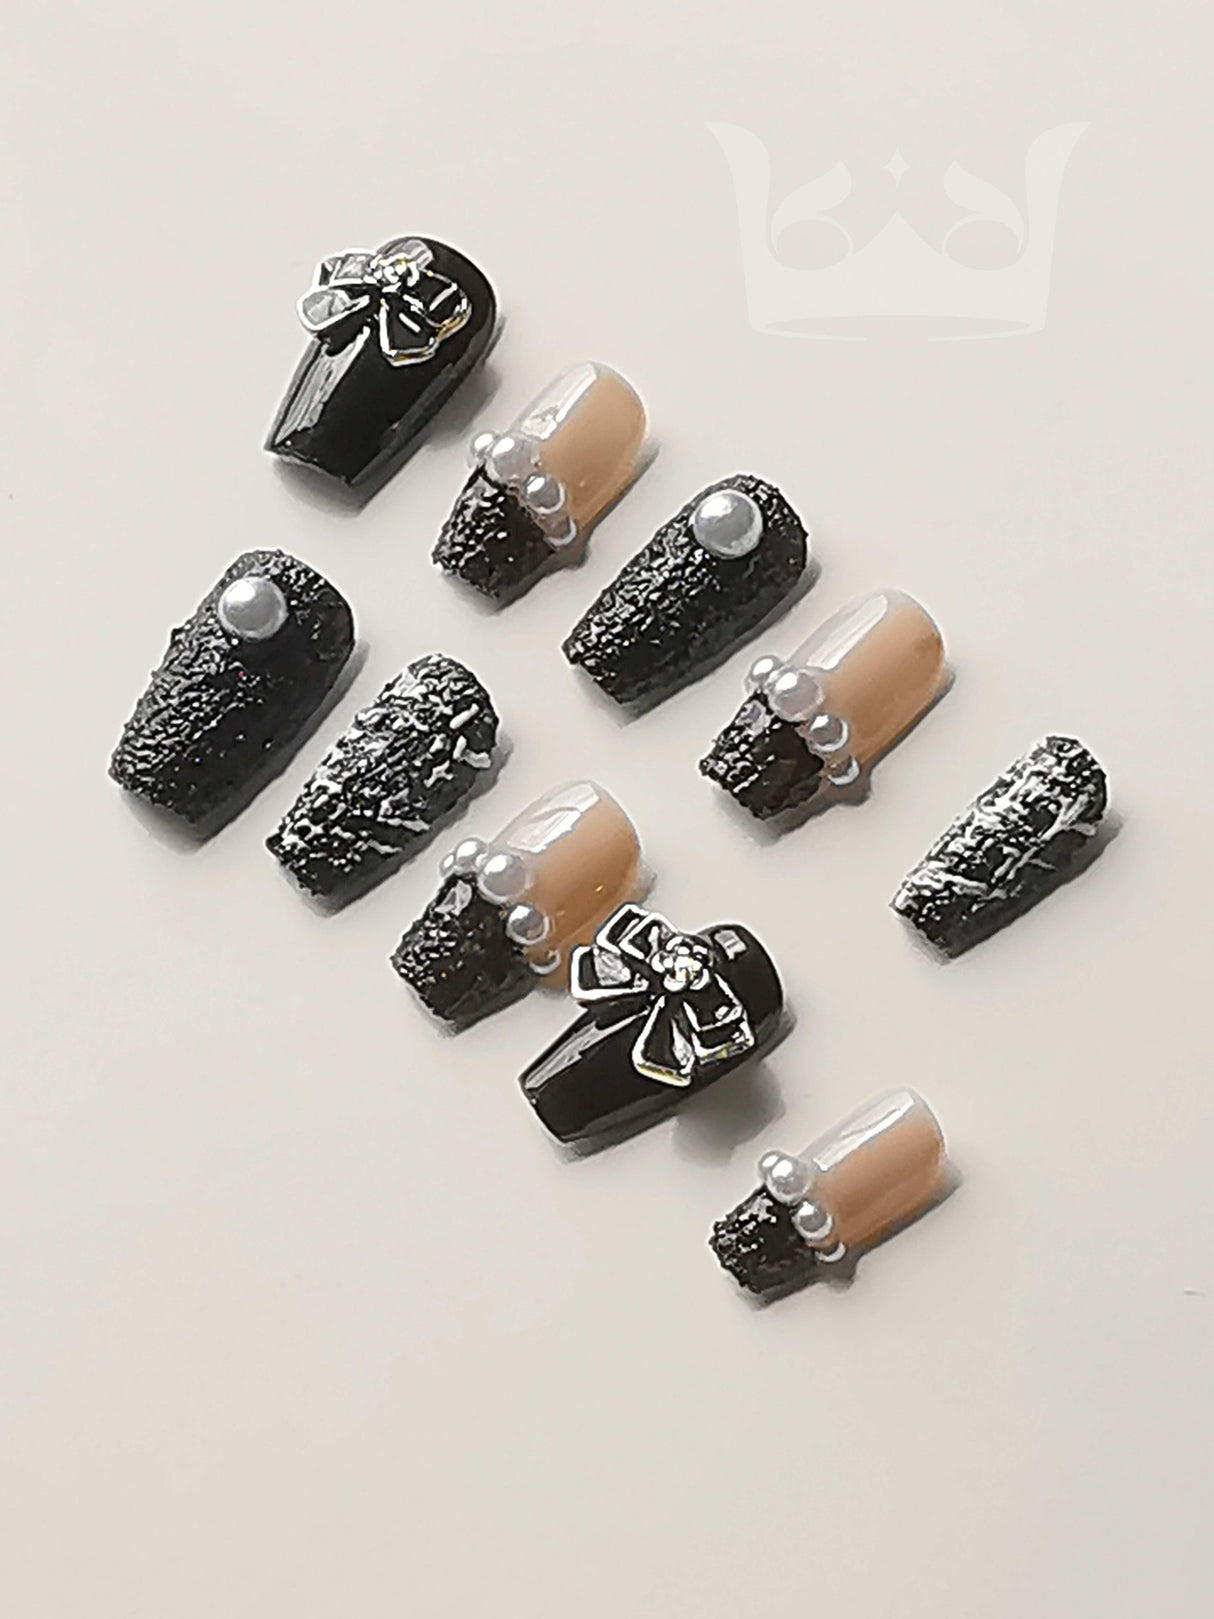 Sophisticated nails with black and nude colors, pearls, metallic details, bow accents, and mixed finishes are perfect for special occasions or a night out.